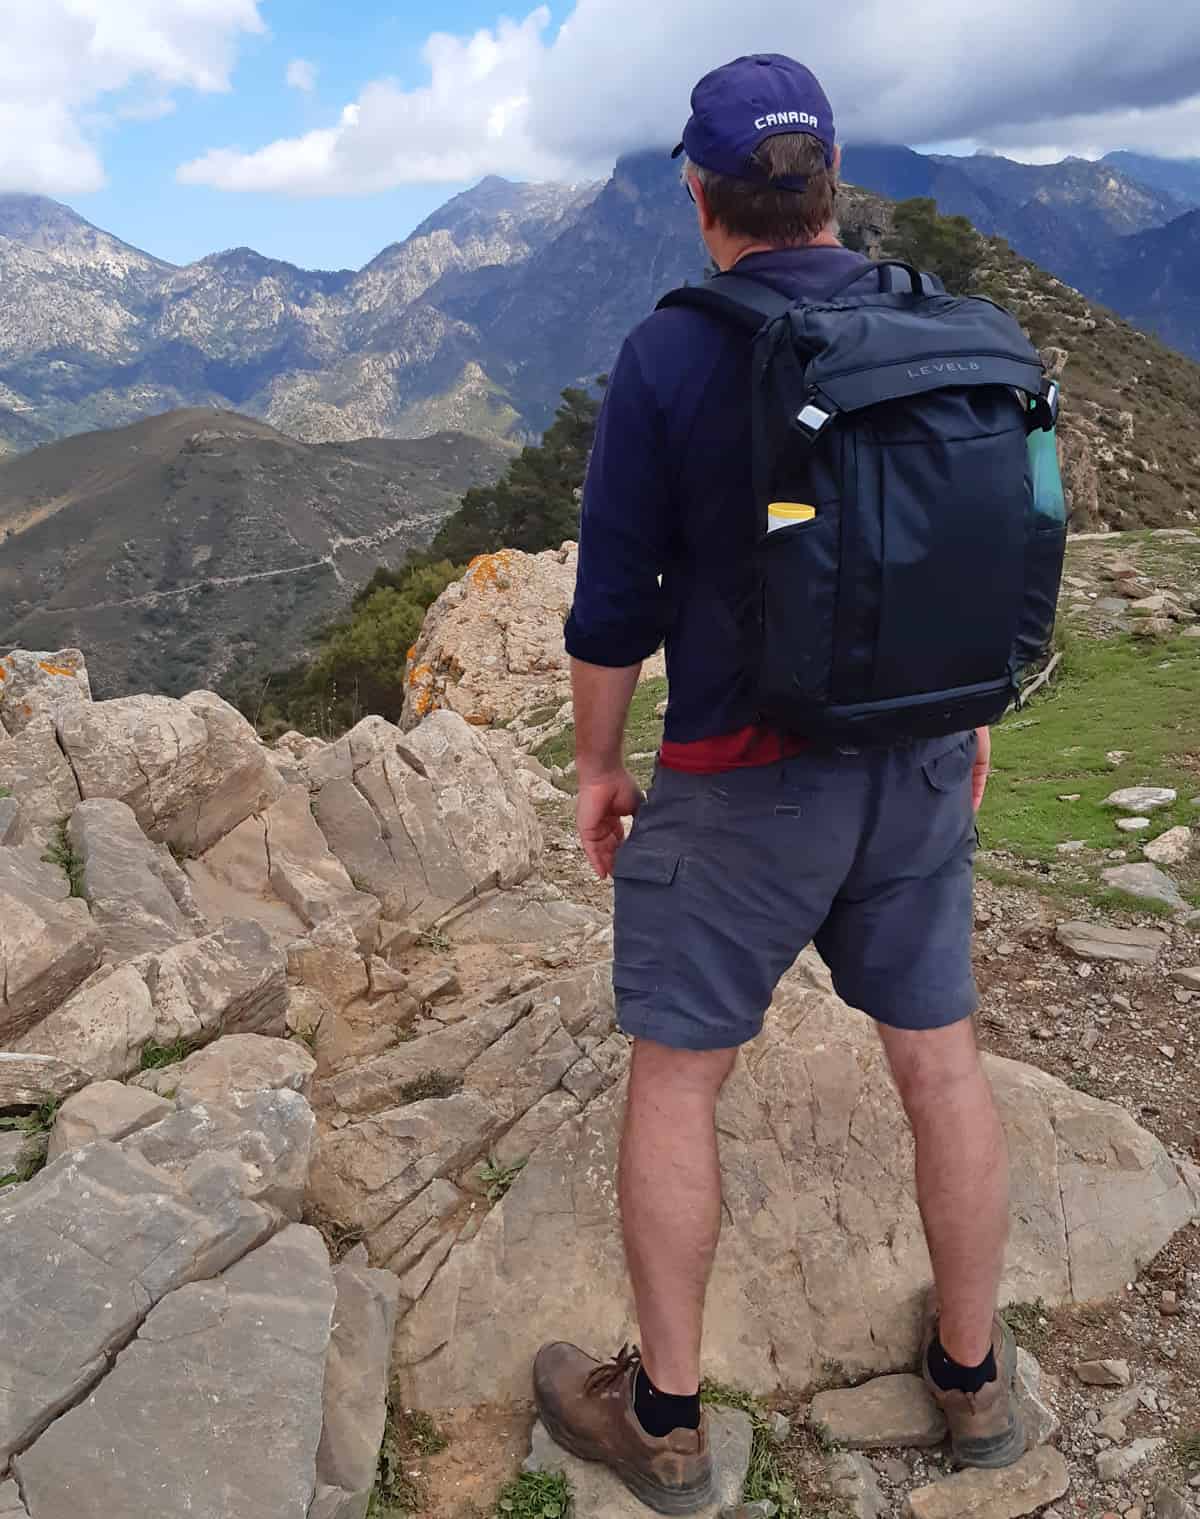 Hiking with the Reboot backpack